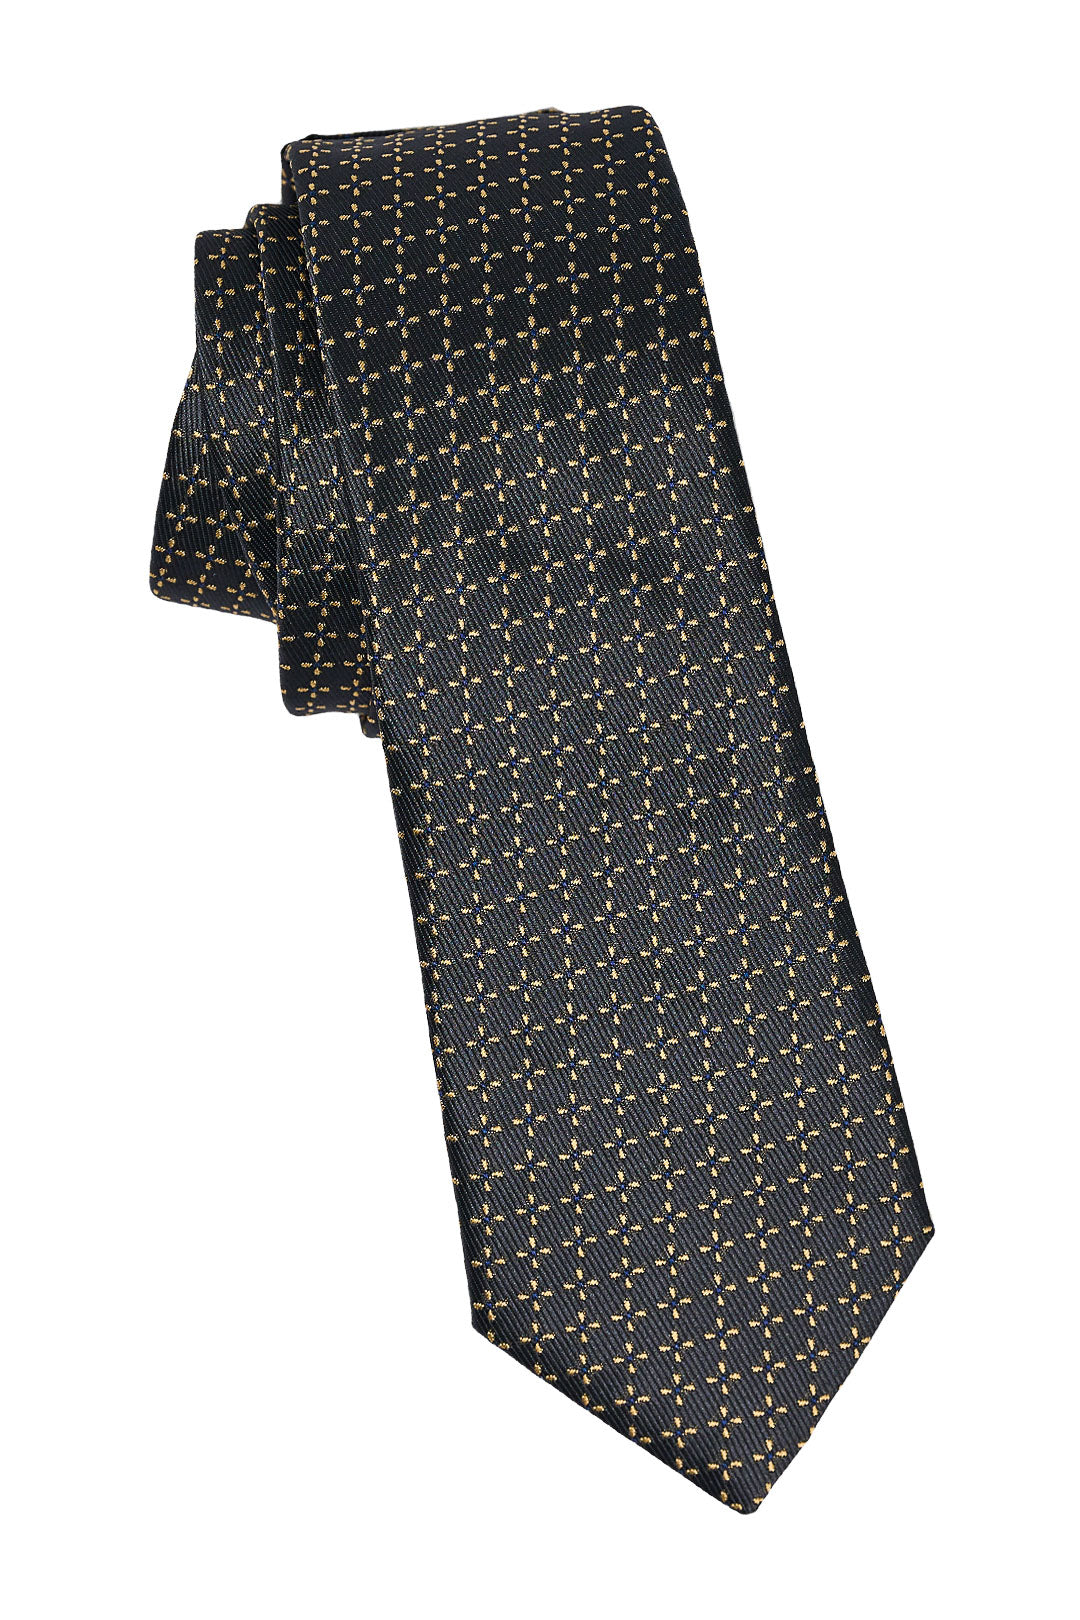 Silk Black And Gold Tie